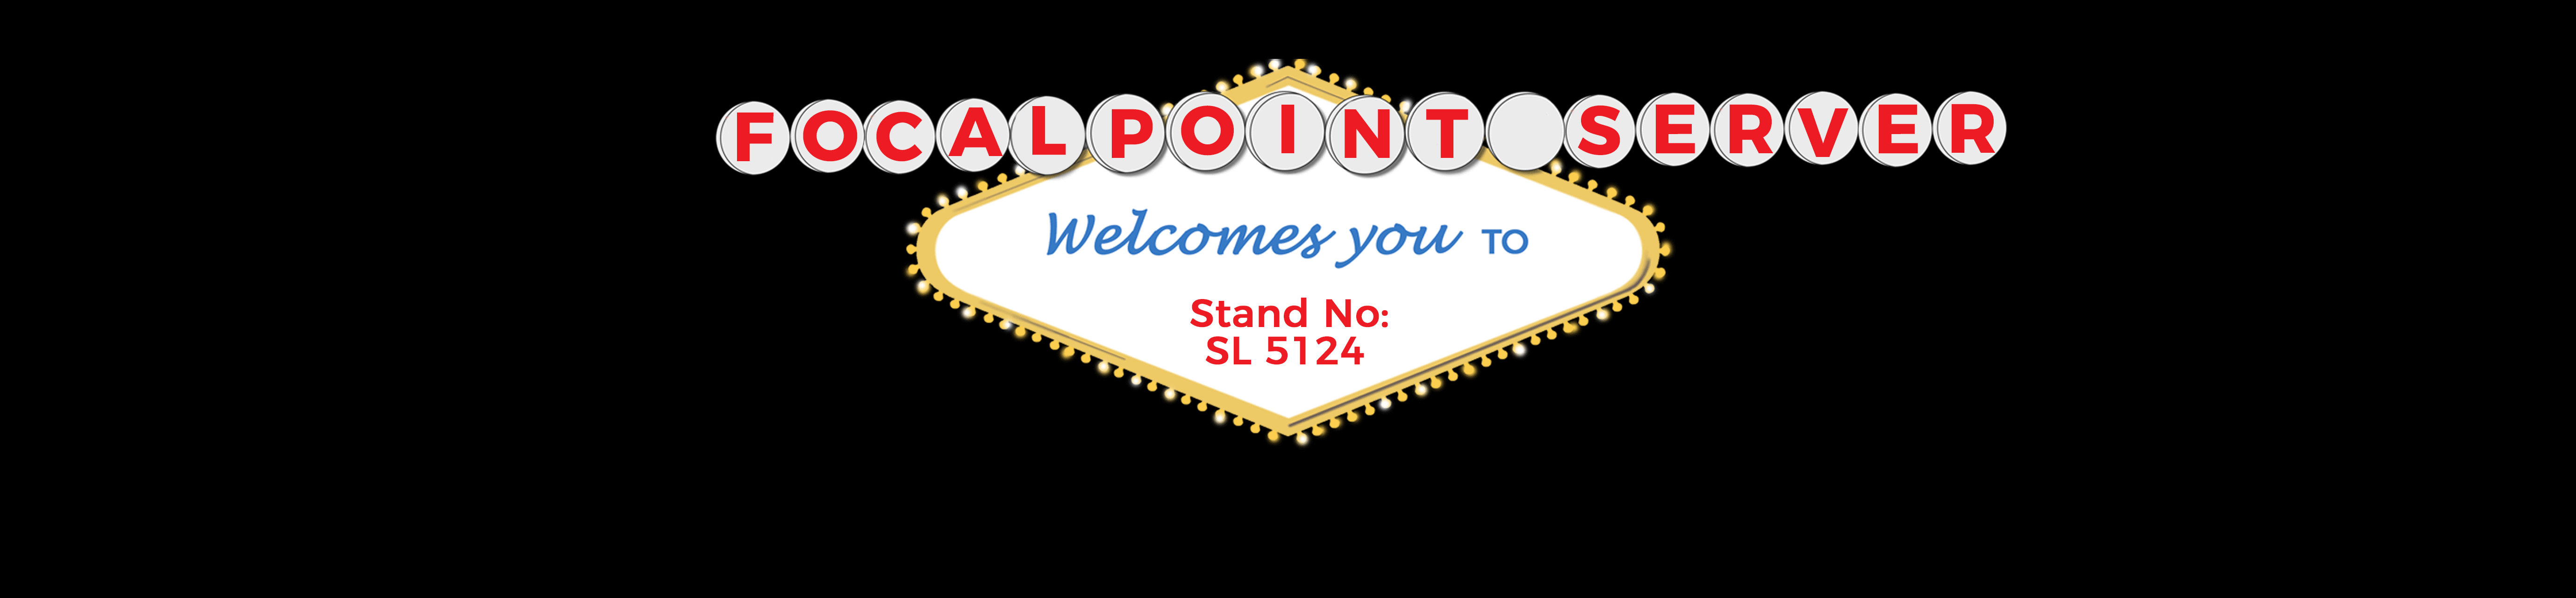 What To See At NAB 2018_FocalPoint Server